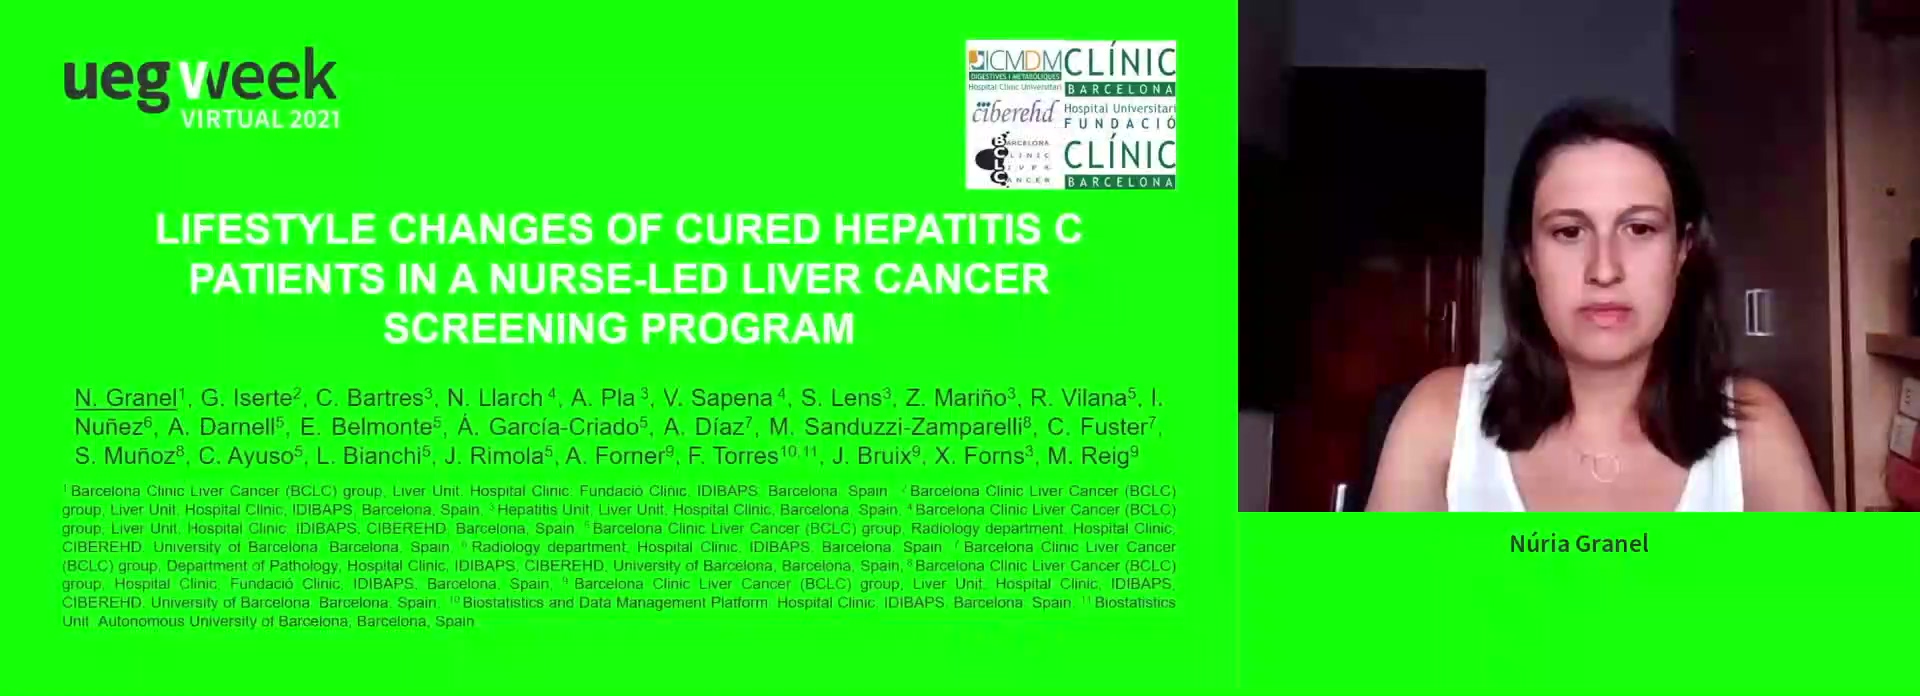 LIFESTYLE CHANGES OF CURED HEPATITIS C PATIENTS IN A NURSE-LED LIVER CANCER SCREENING PROGRAM